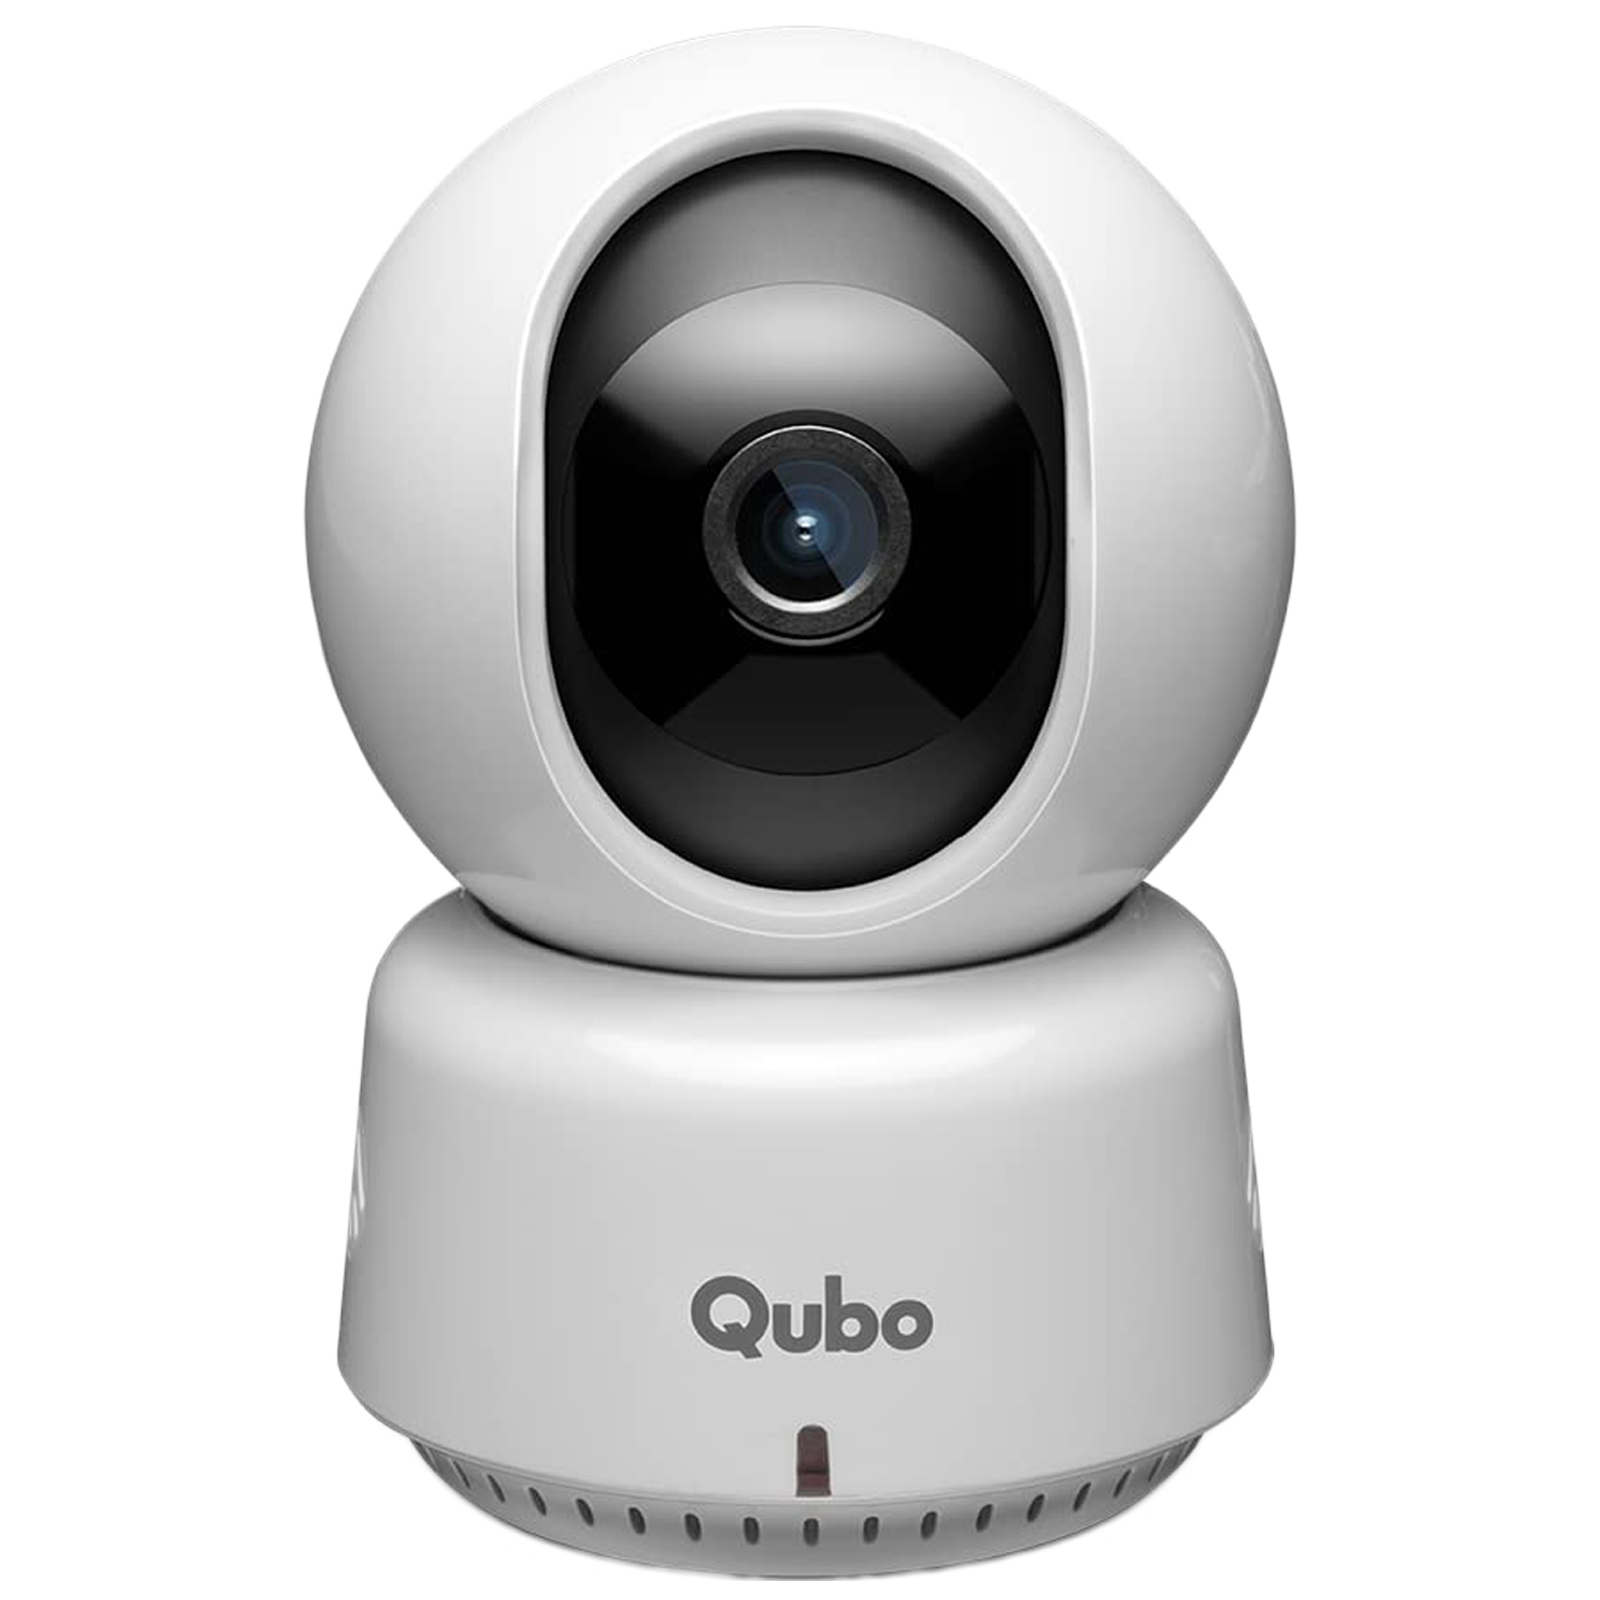 Qubo 360 Smart CCTV Security Camera (Advance AI Ditection with Motion Tracking and Google Assistant Support, OC- HCP01GW, White)